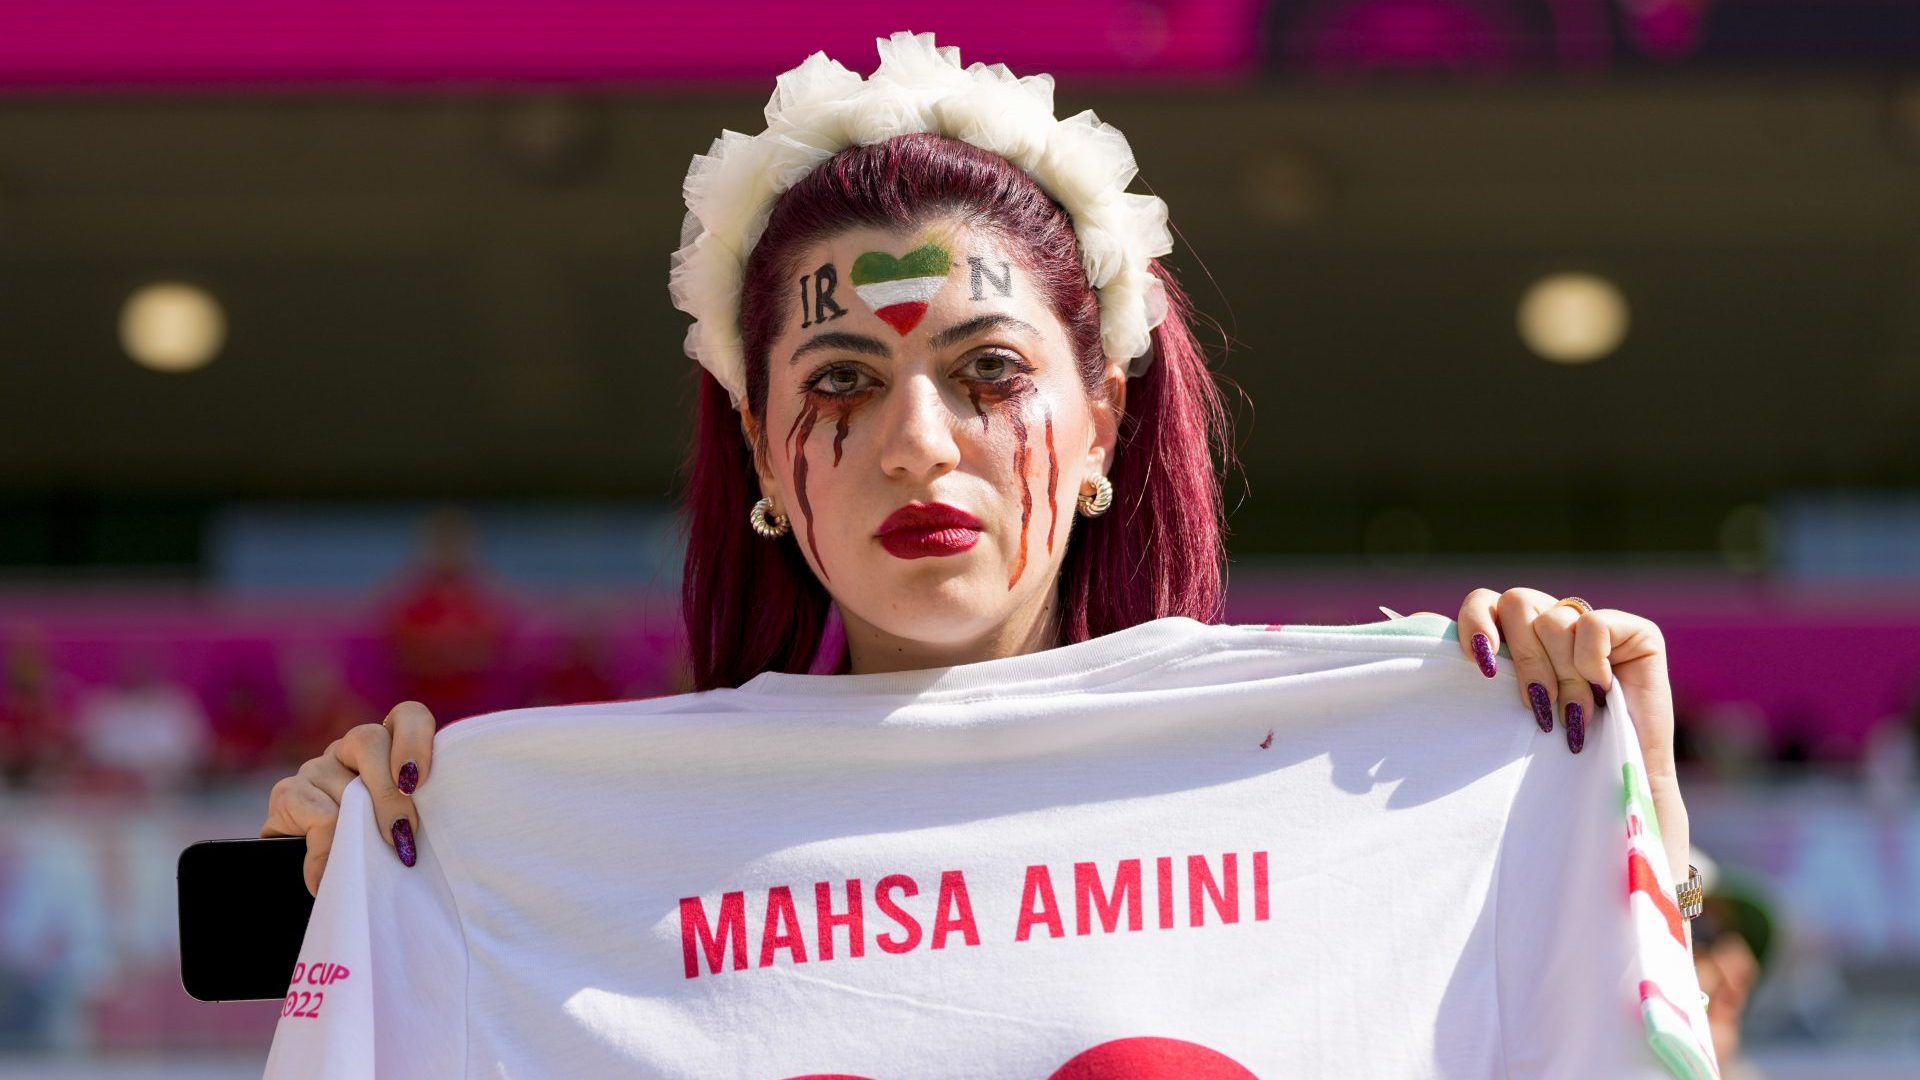 Fans of Iran protest with flags and banners with the slogan Woman Life Freedom prior to the World Cup Qatar match between Wales and Iran (Photo by Ulrik Pedersen/DeFodi Images via Getty Images)